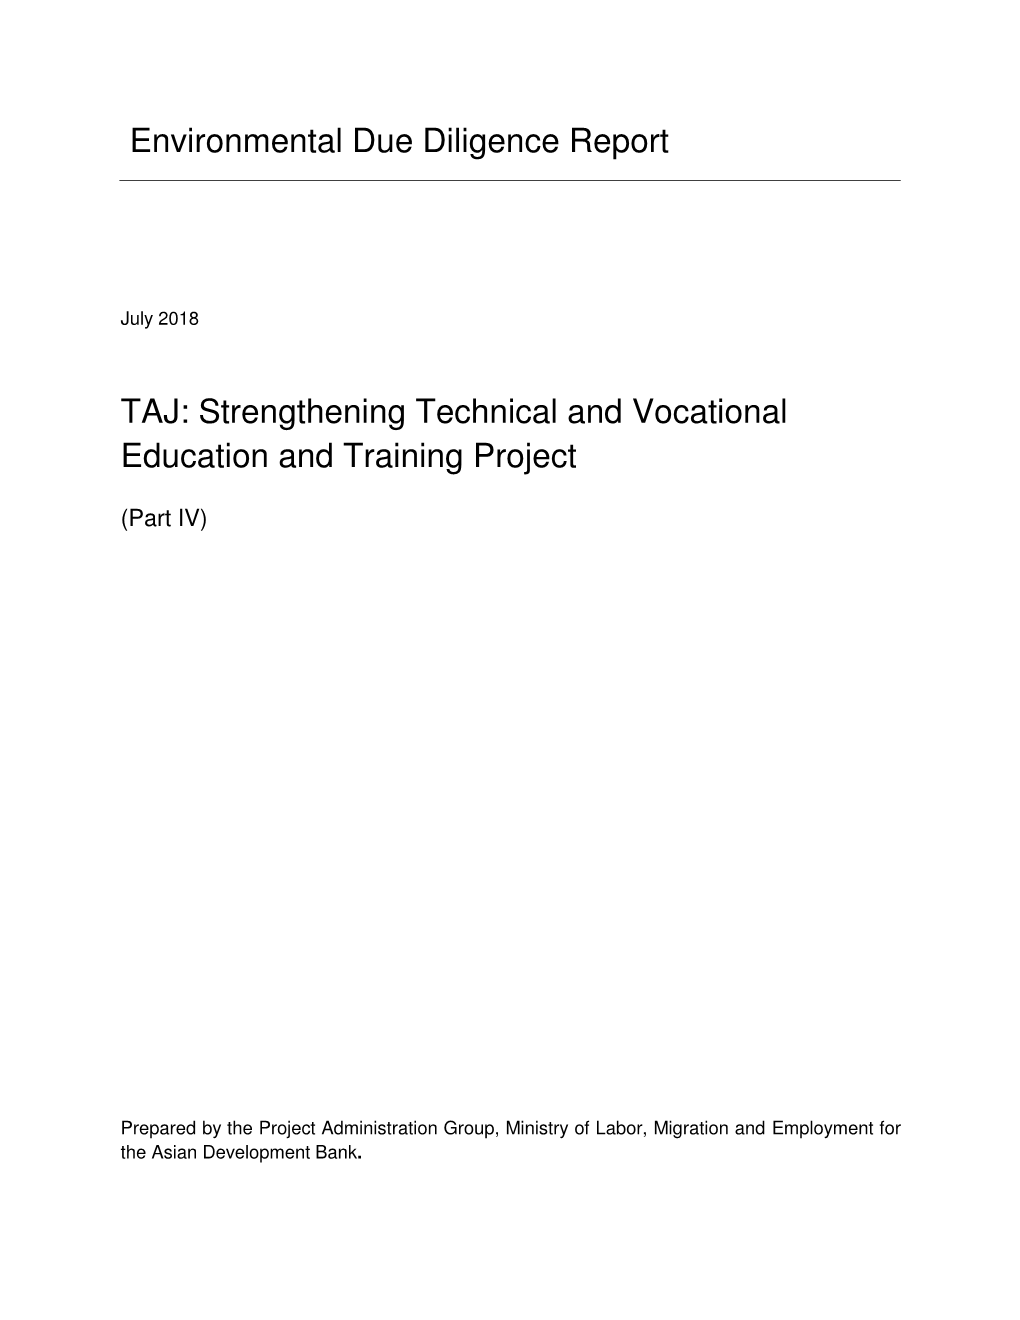 46535-001: Strengthening Technical and Vocational Education And